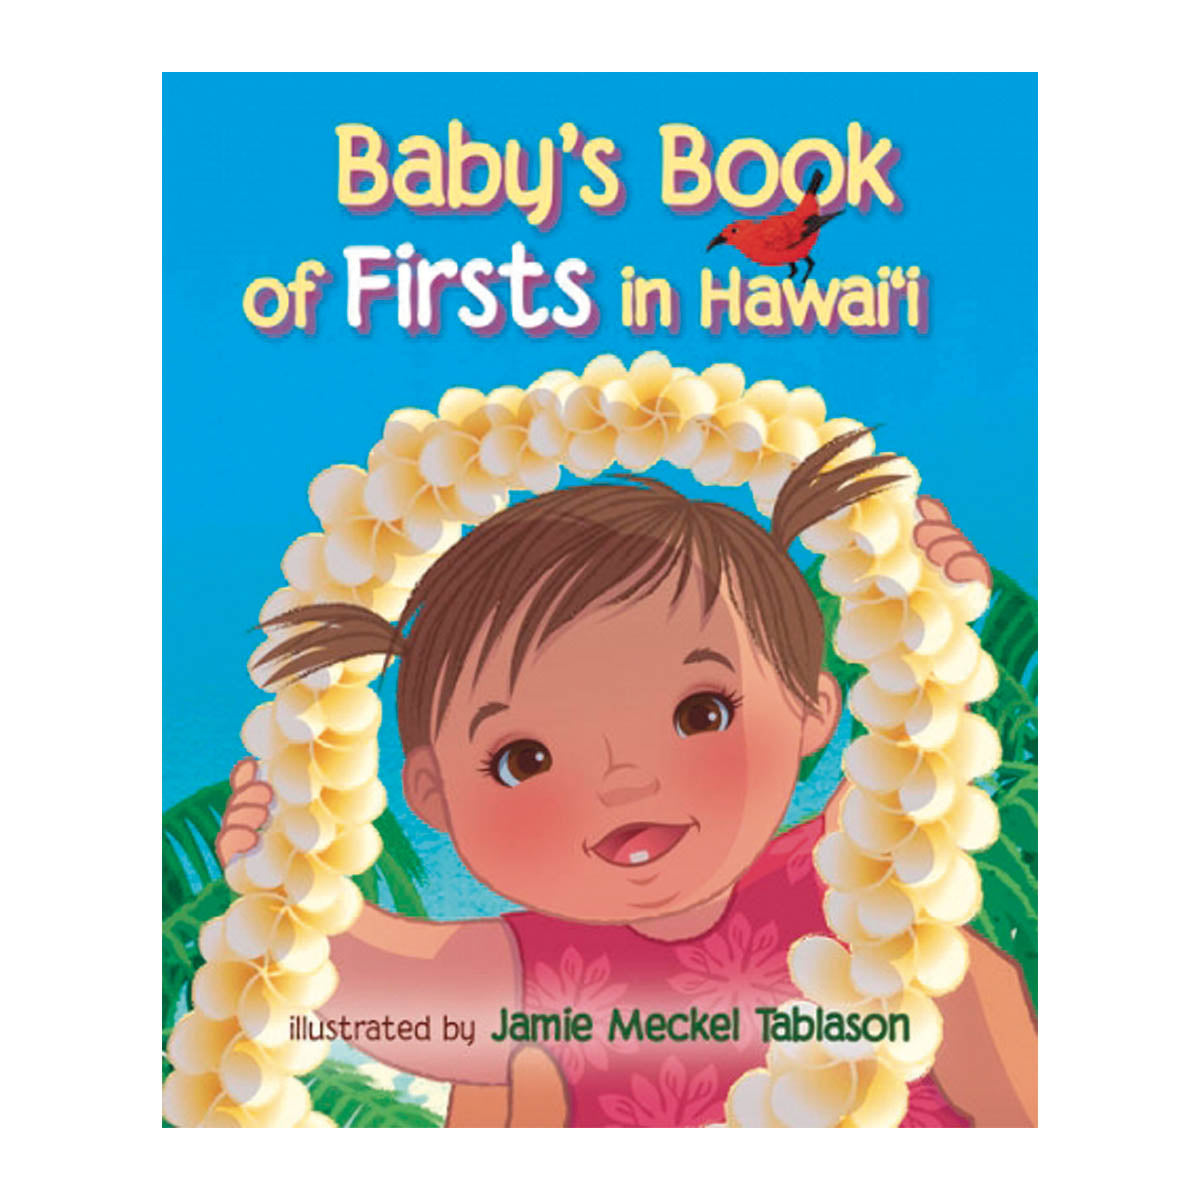 Baby's Book of Firsts in Hawai‘i